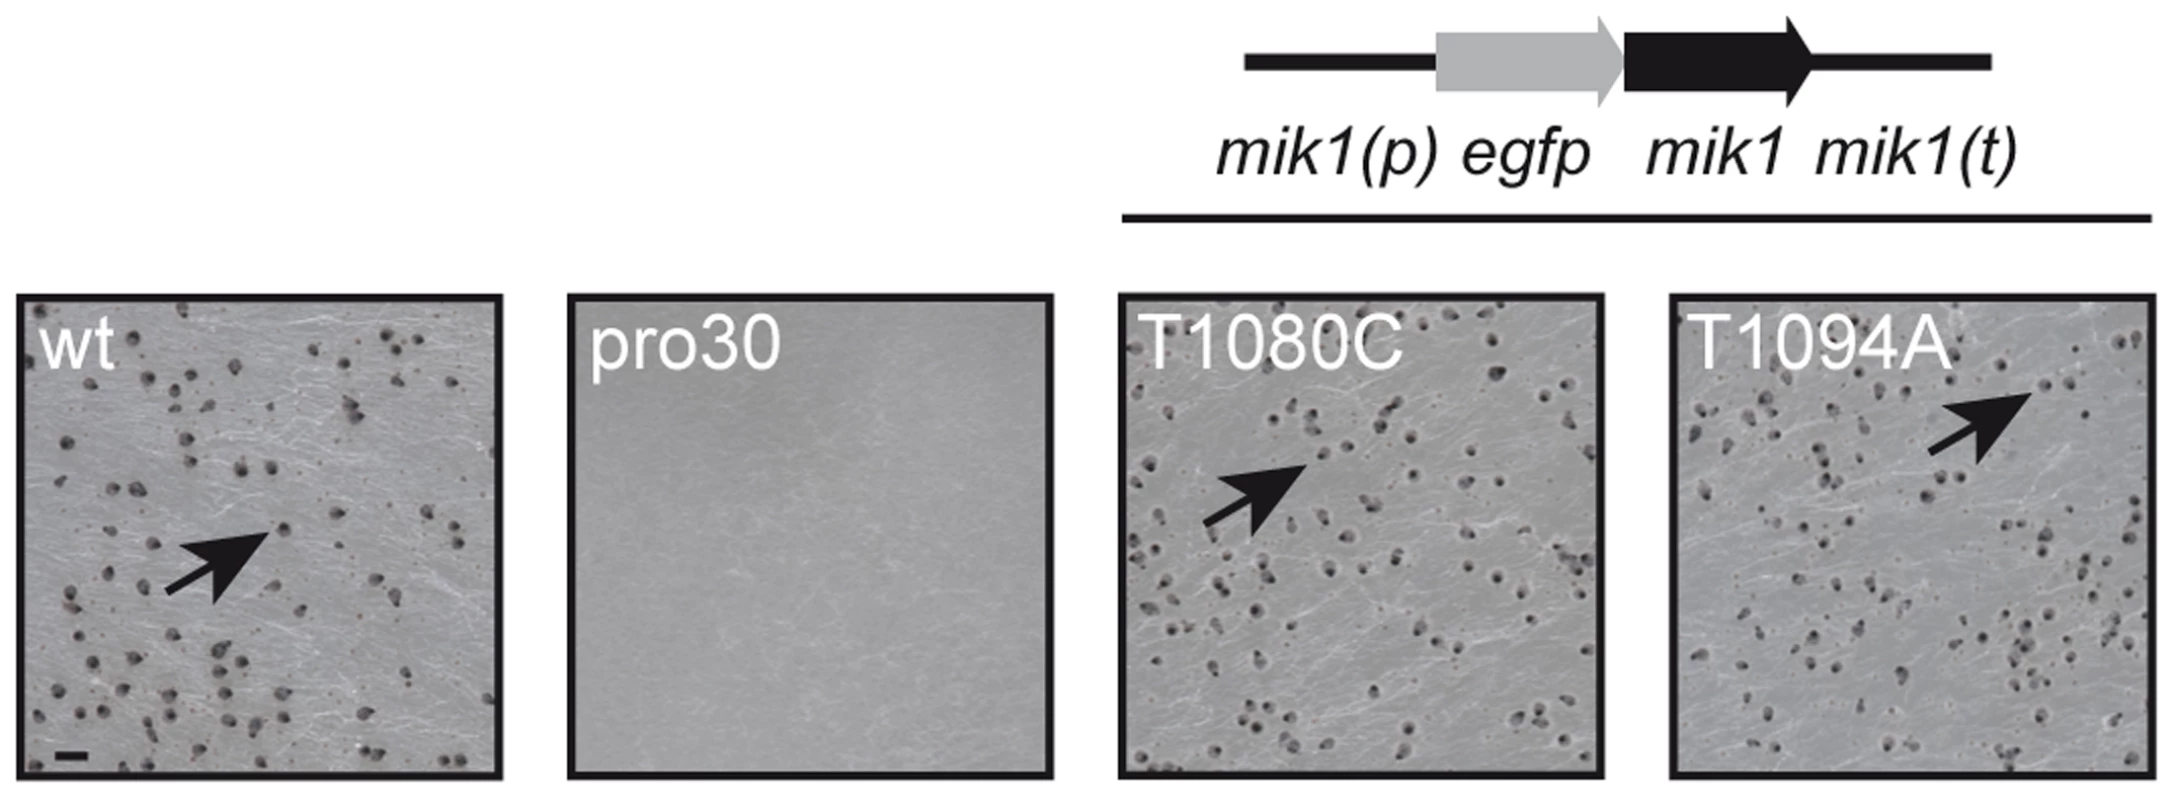 Complementation of pro30 with full-length <i>mik1</i>.